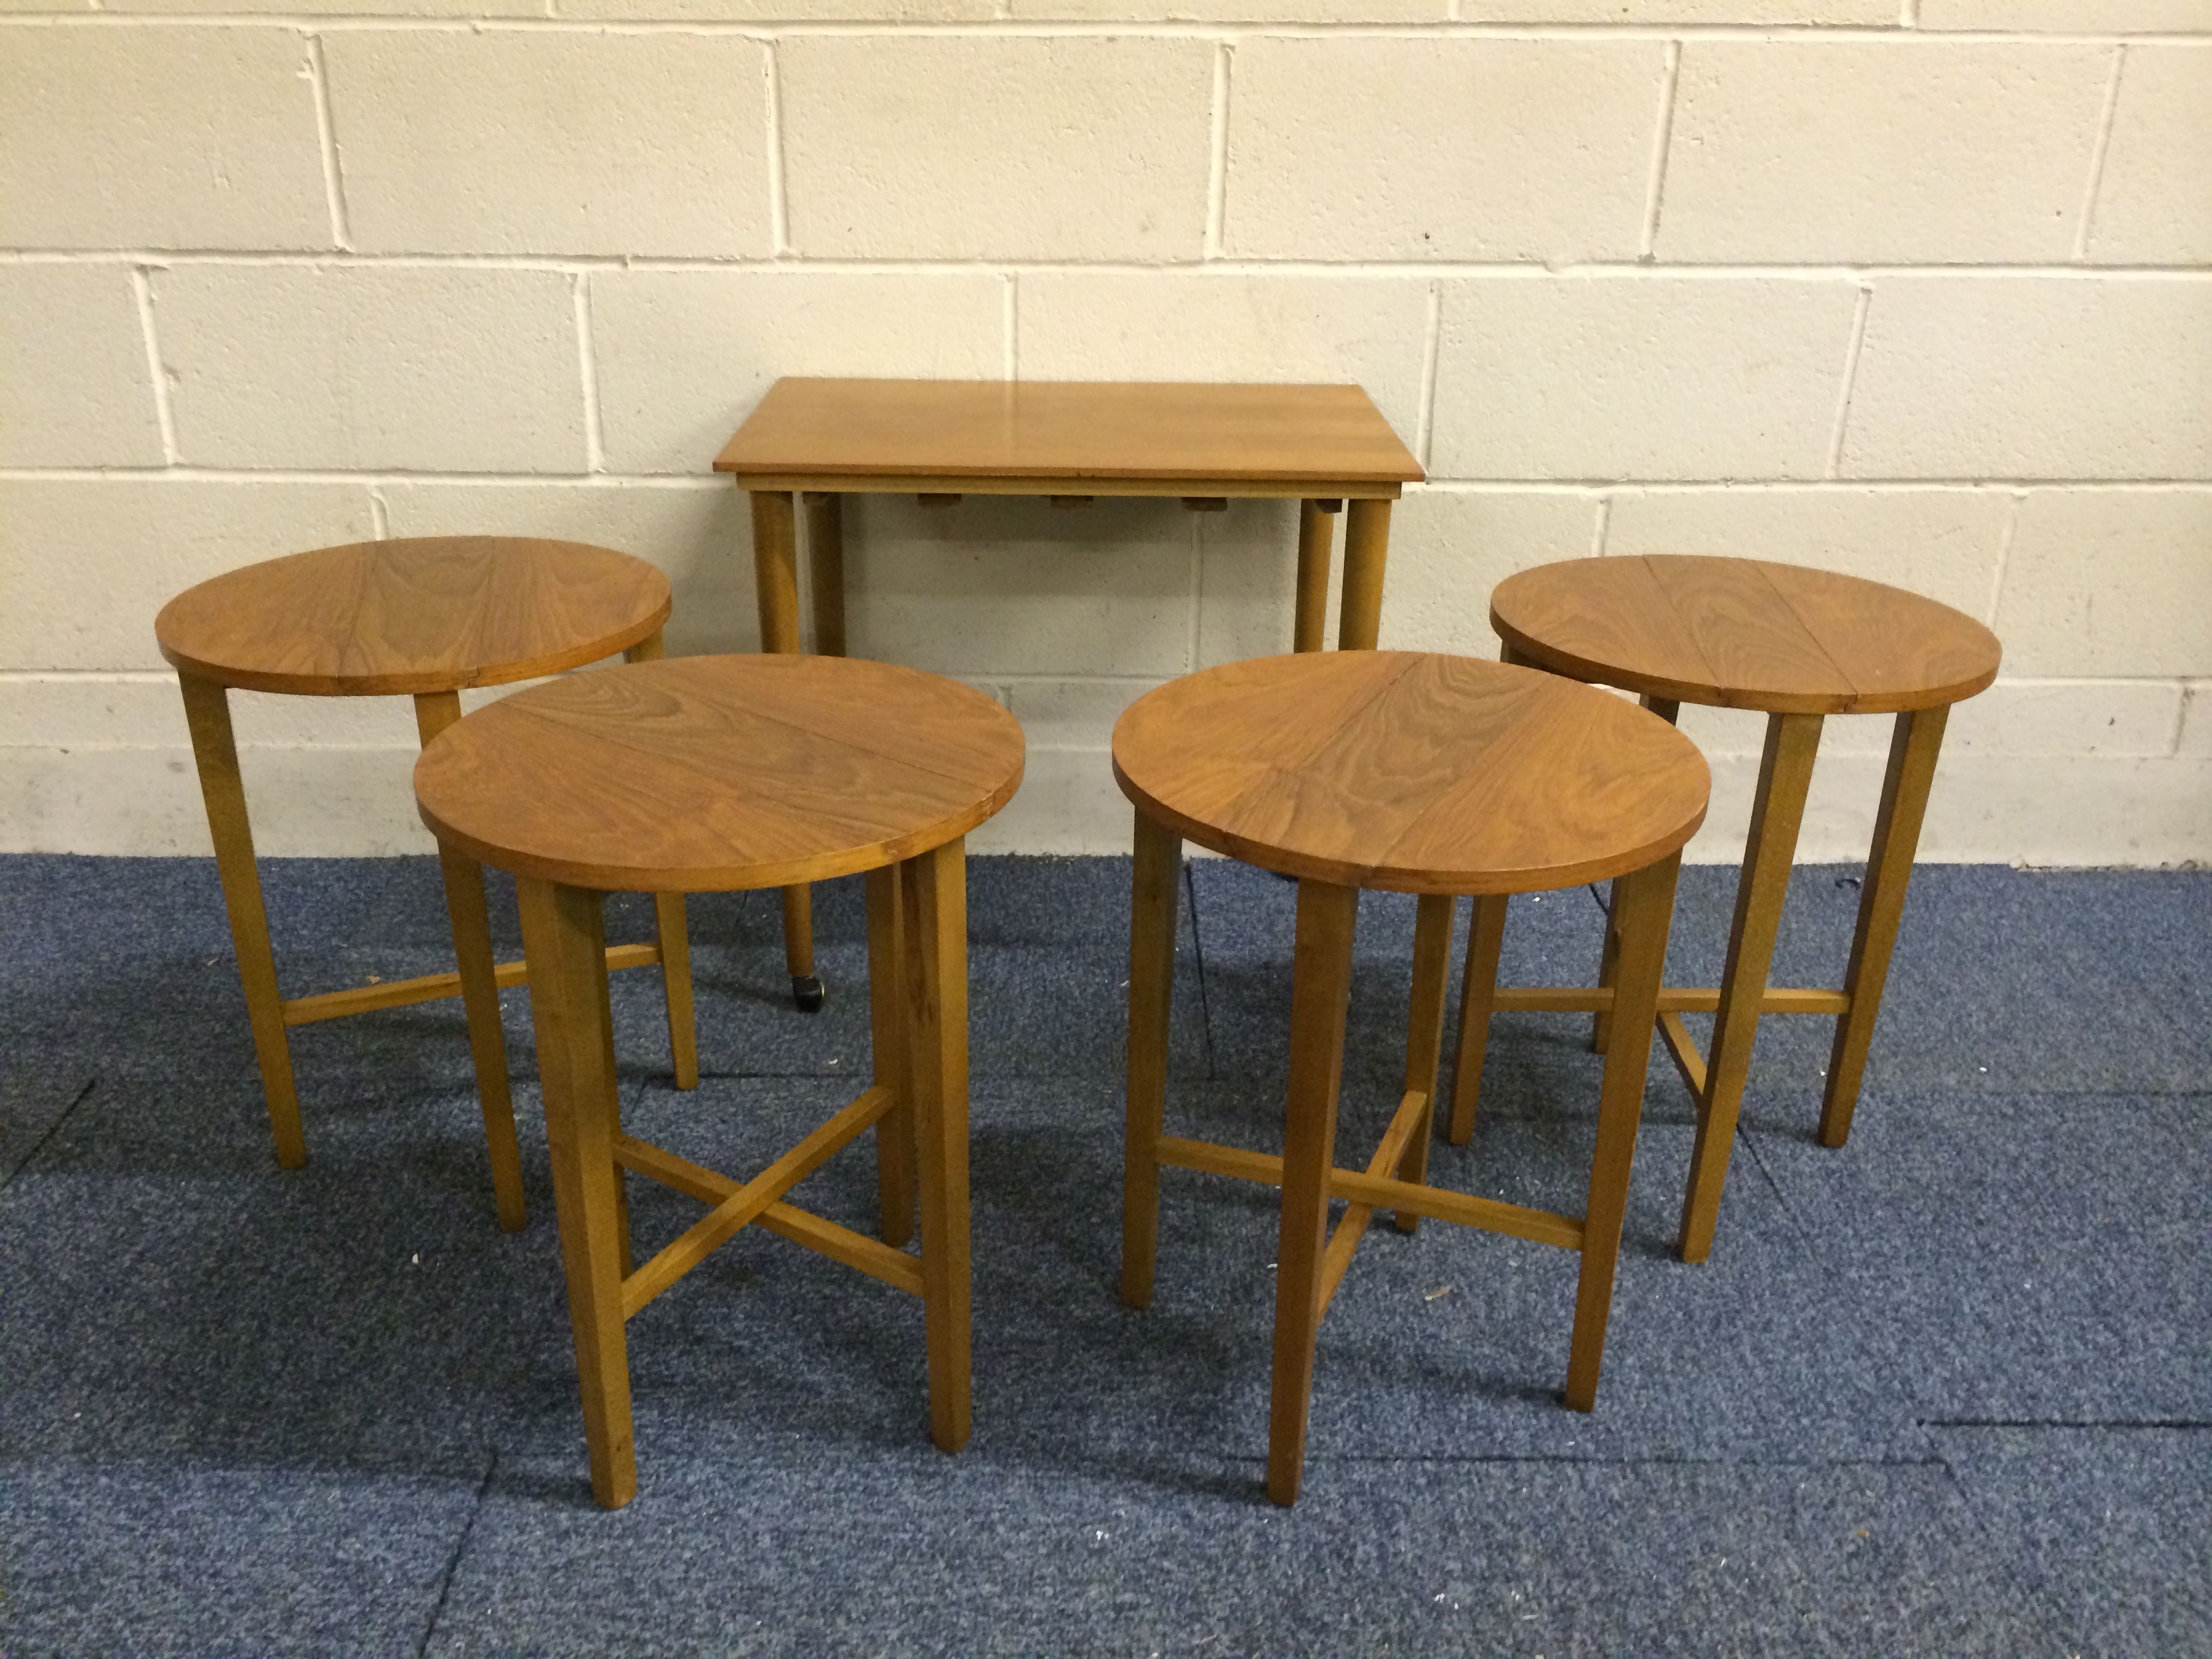 Very nice mid 20th century teak retro tables set..with 4 small circular tables stored under the main